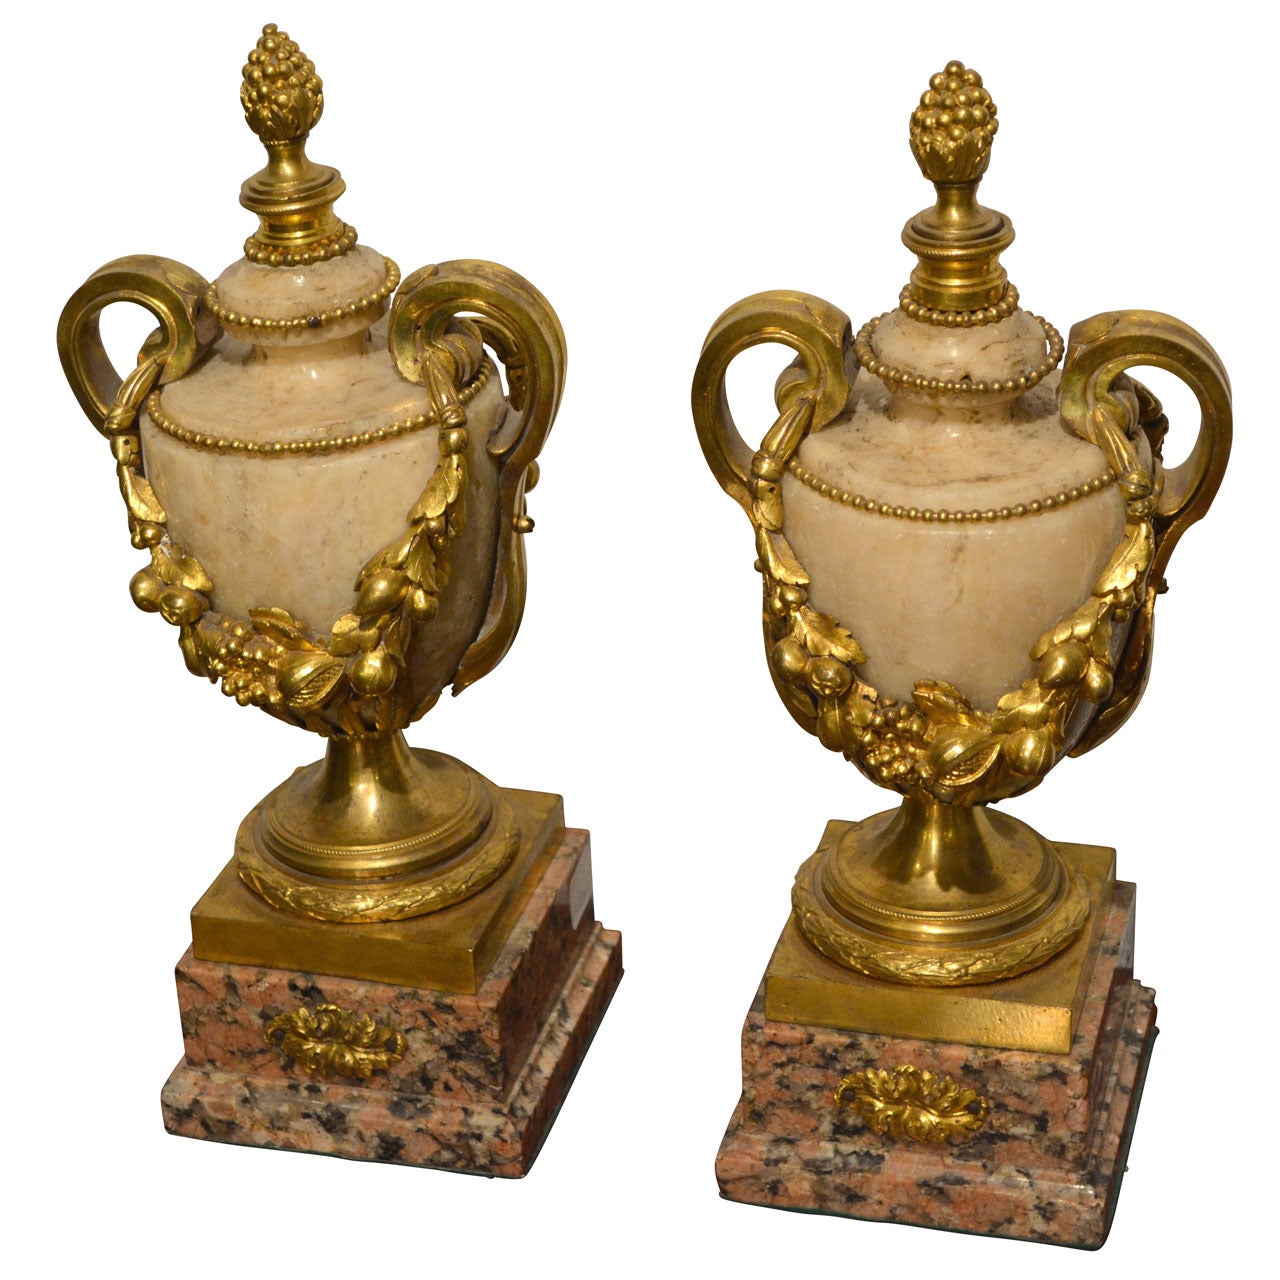 Pair of 18th Century Ormolu and Marble Vases